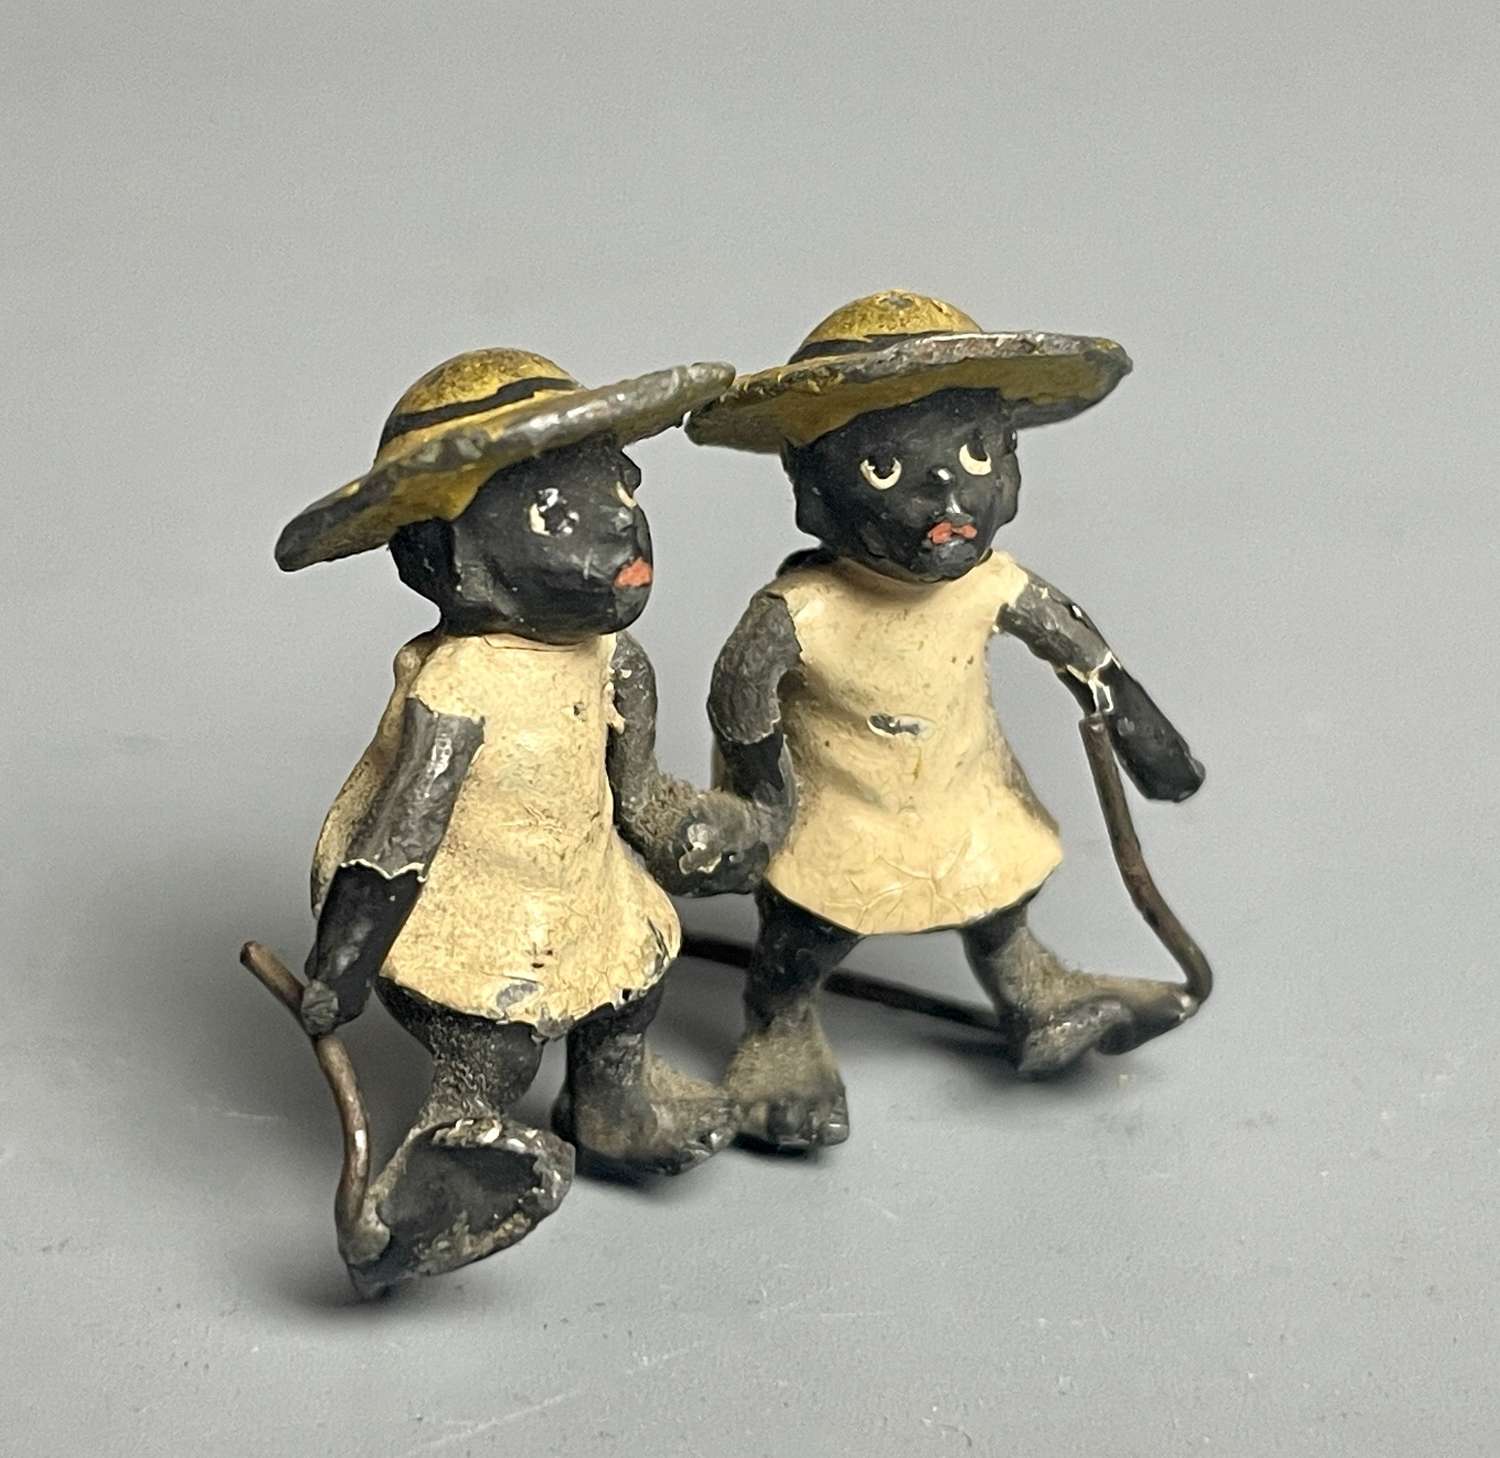 Miniature Painted Lead Group Figure of Two Black Children